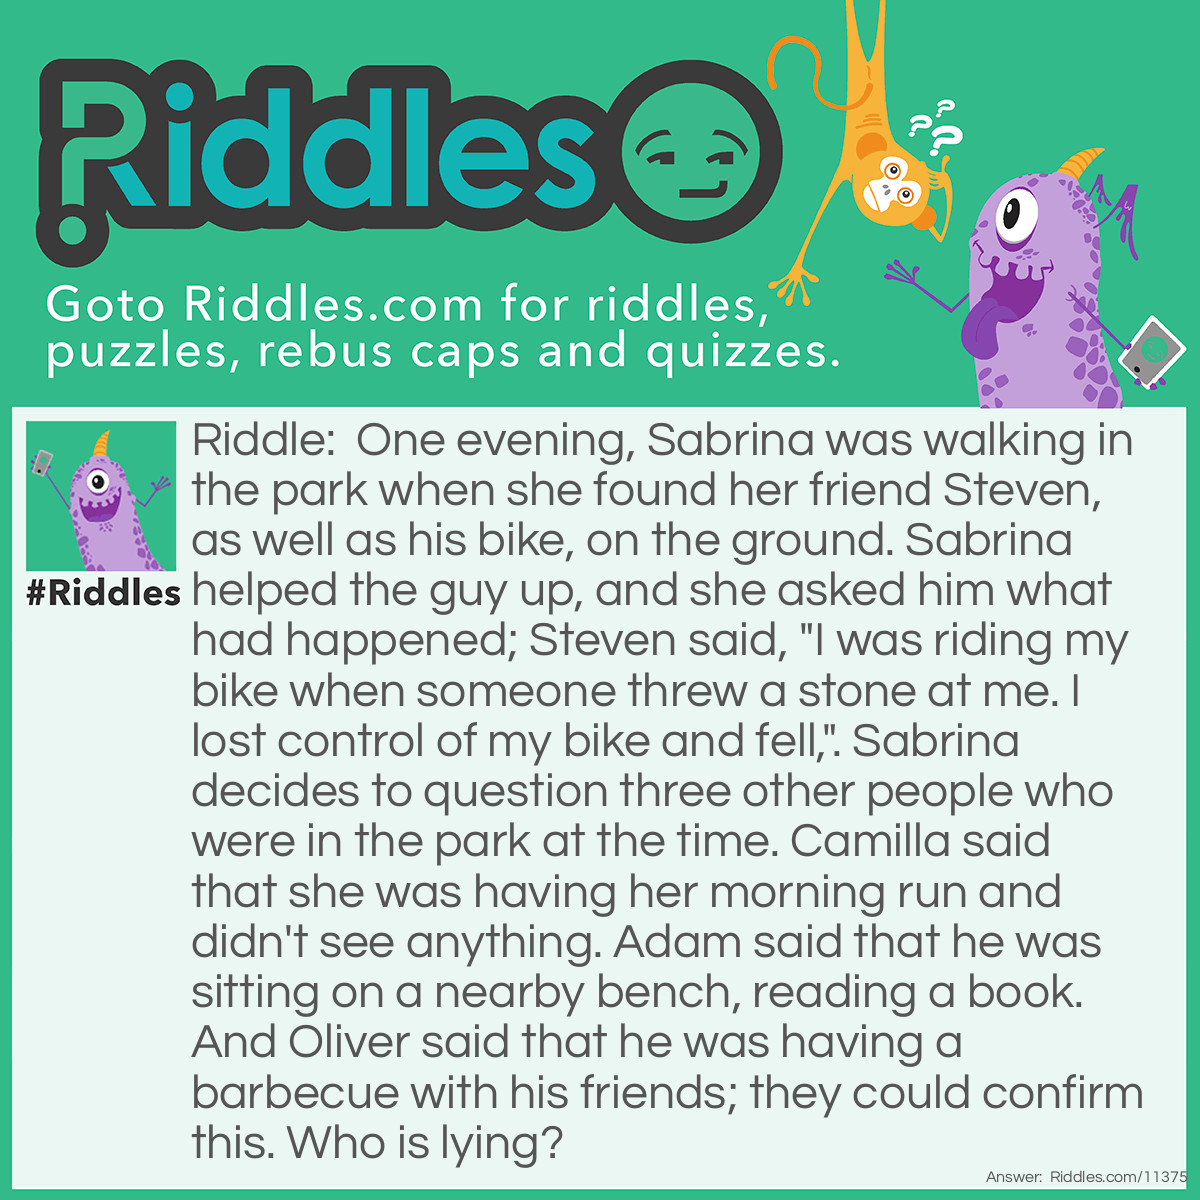 Riddle: One evening, Sabrina was walking in the park when she found her friend Steven, as well as his bike, on the ground. Sabrina helped the guy up, and she asked him what had happened; Steven said, "I was riding my bike when someone threw a stone at me. I lost control of my bike and fell,". Sabrina decides to question three other people who were in the park at the time. Camilla said that she was having her morning run and didn't see anything. Adam said that he was sitting on a nearby bench, reading a book. And Oliver said that he was having a barbecue with his friends; they could confirm this. Who is lying? Answer: Camilla couldn't have her MORNING run because it was EVENING. Therefore, she is lying.